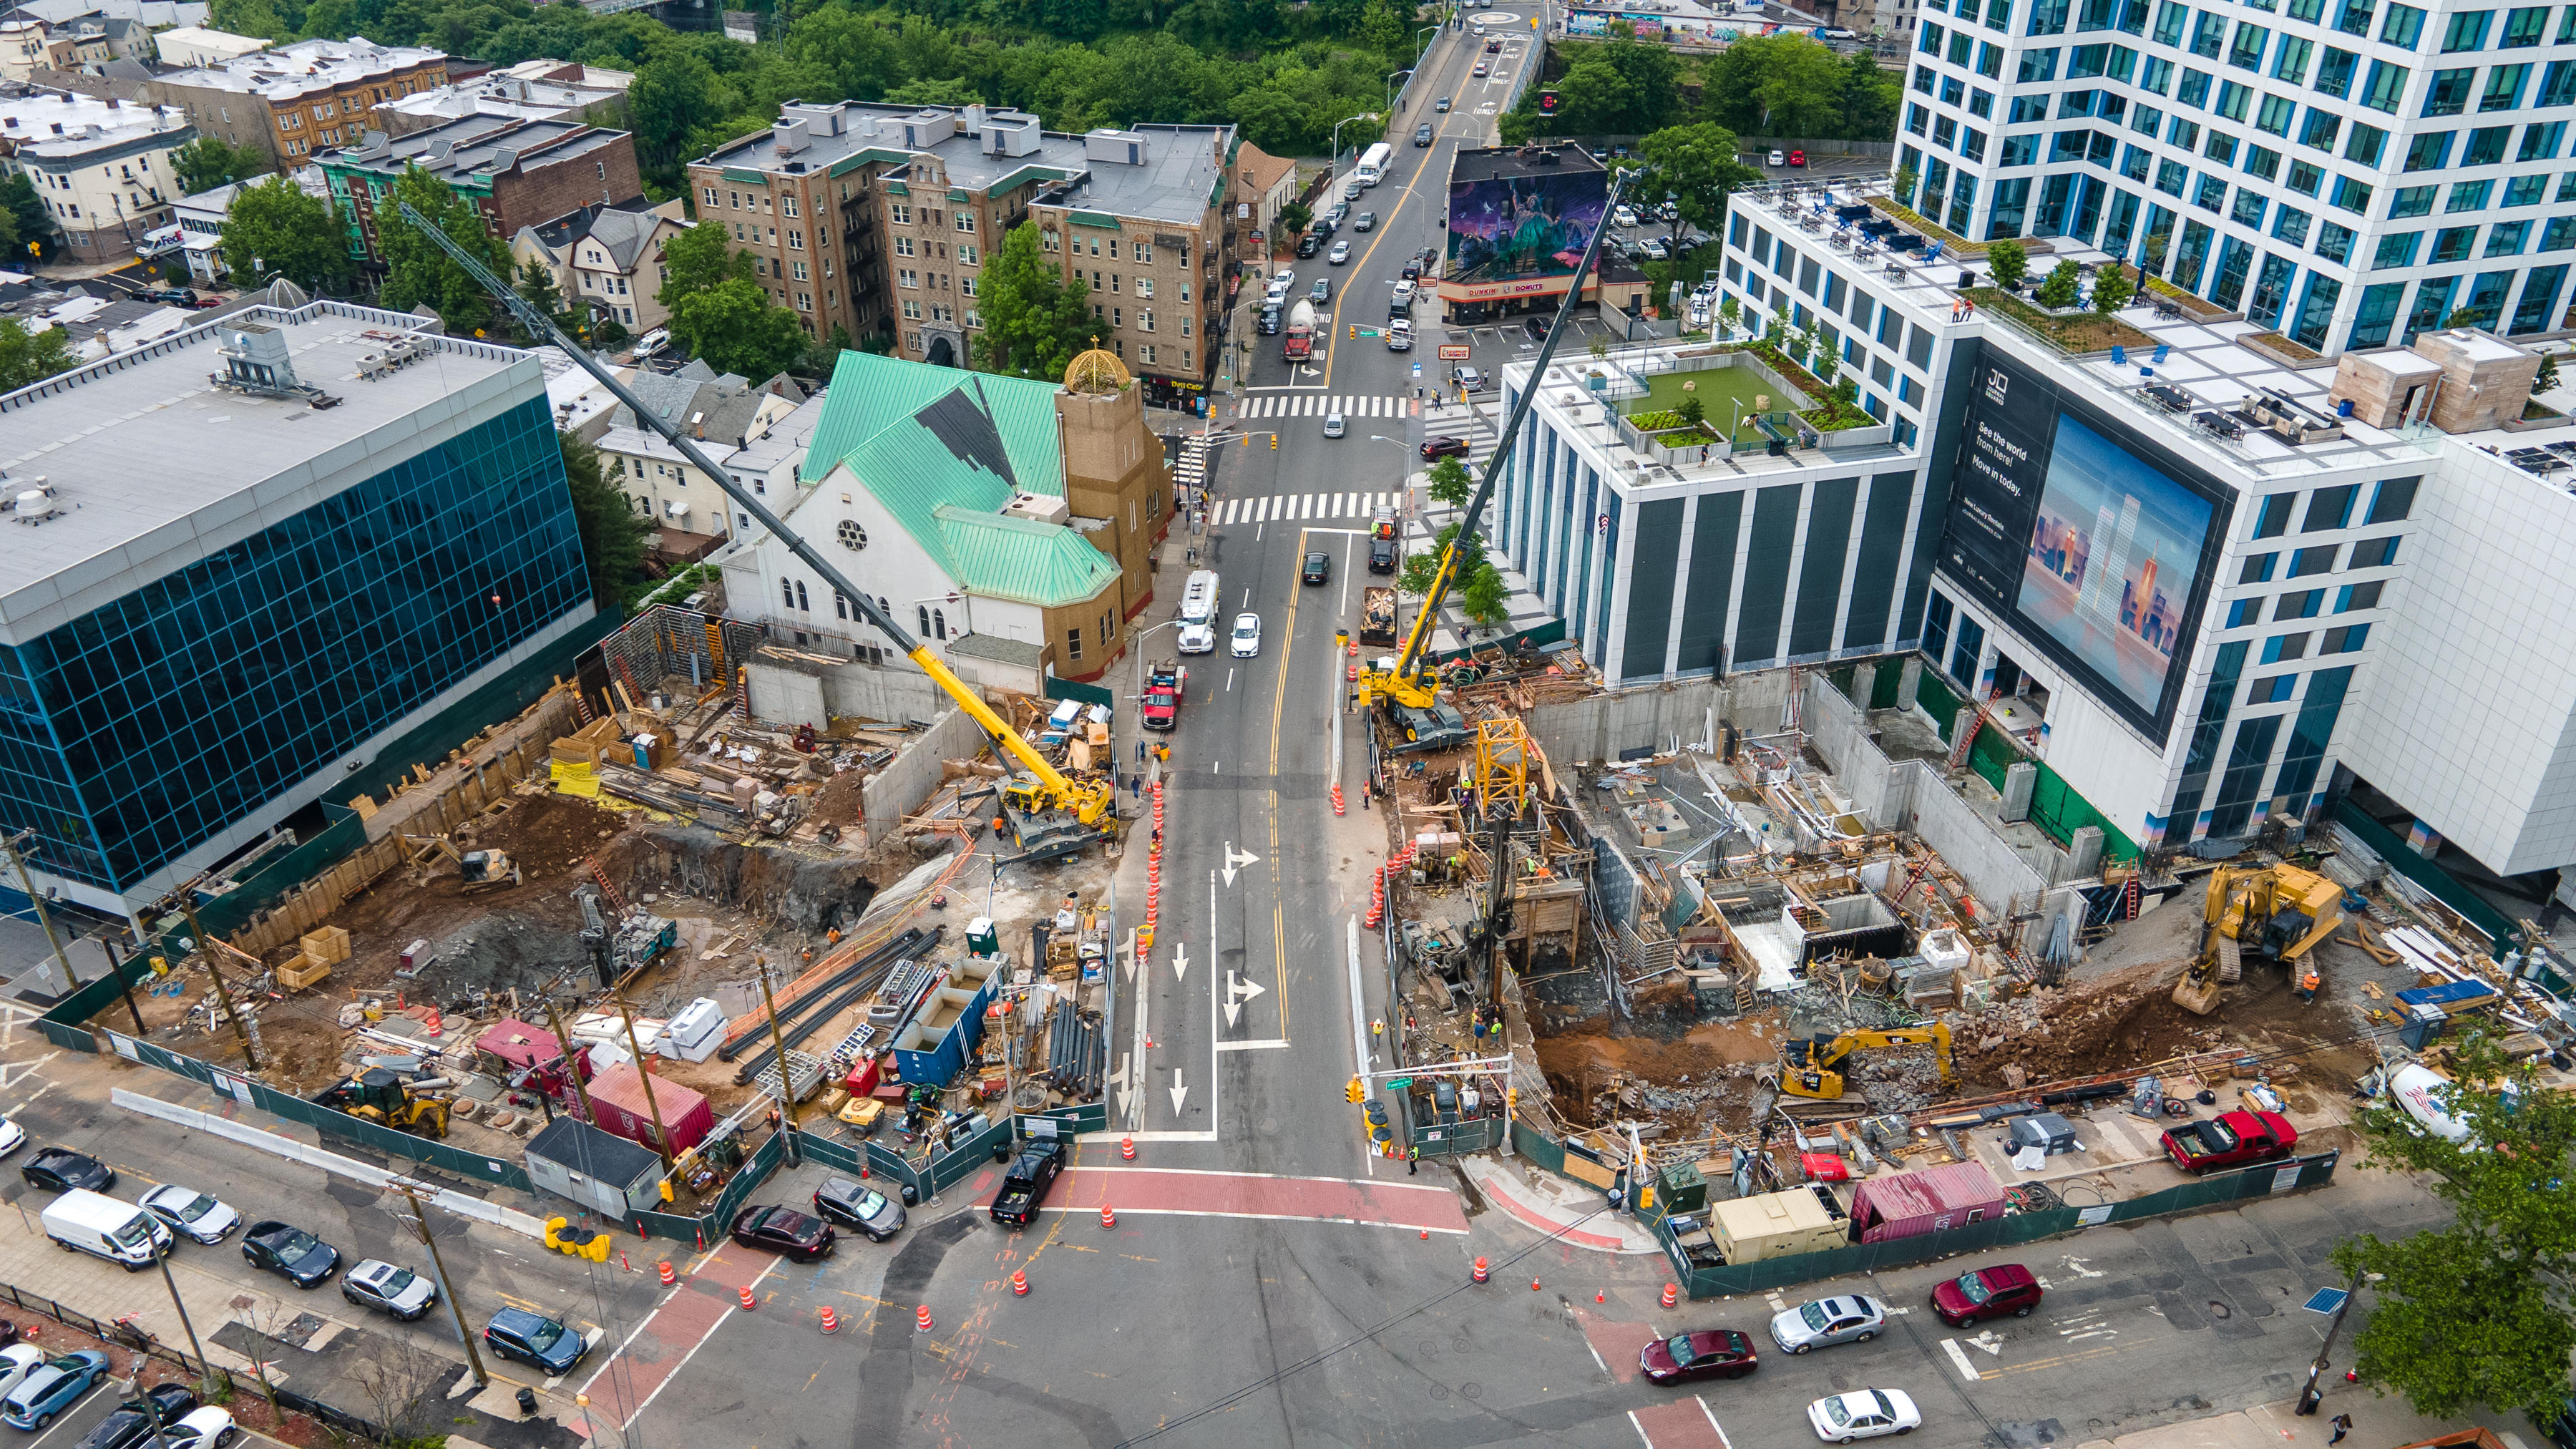 At long last, Kushner's One Journal Square project gets off the ground 